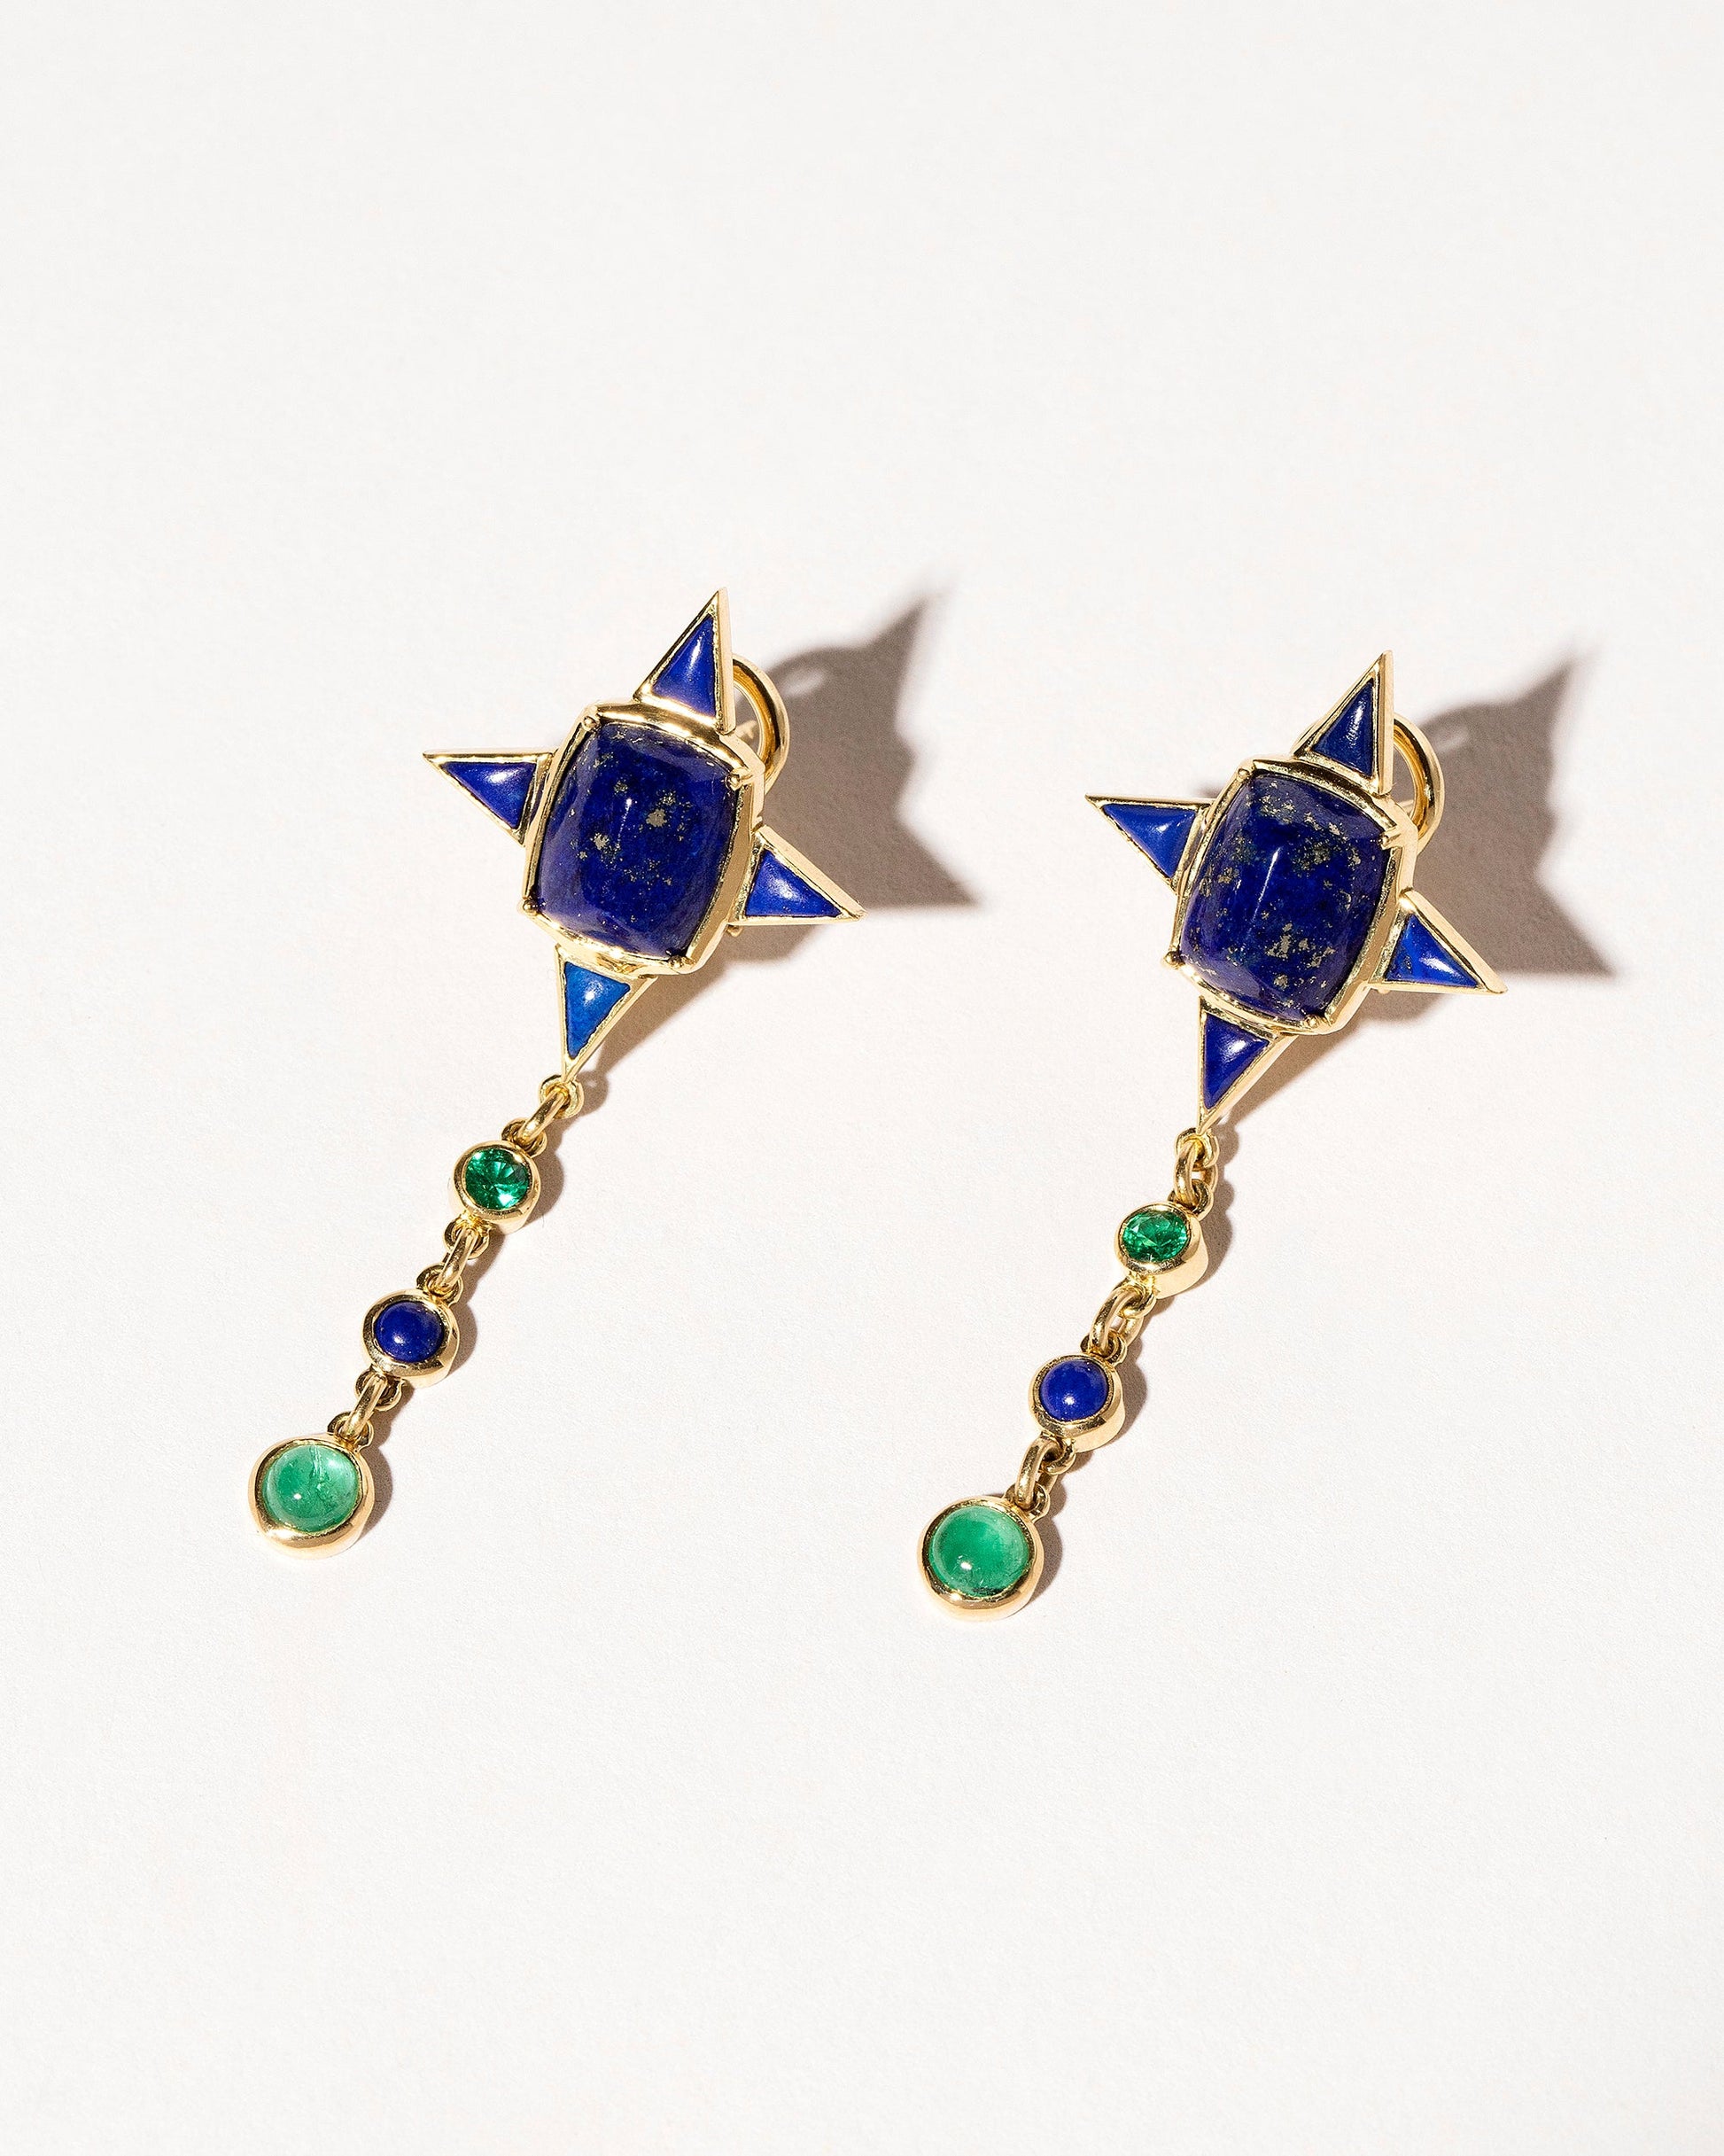  Lapis & Emerald Drop Earrings on light color background